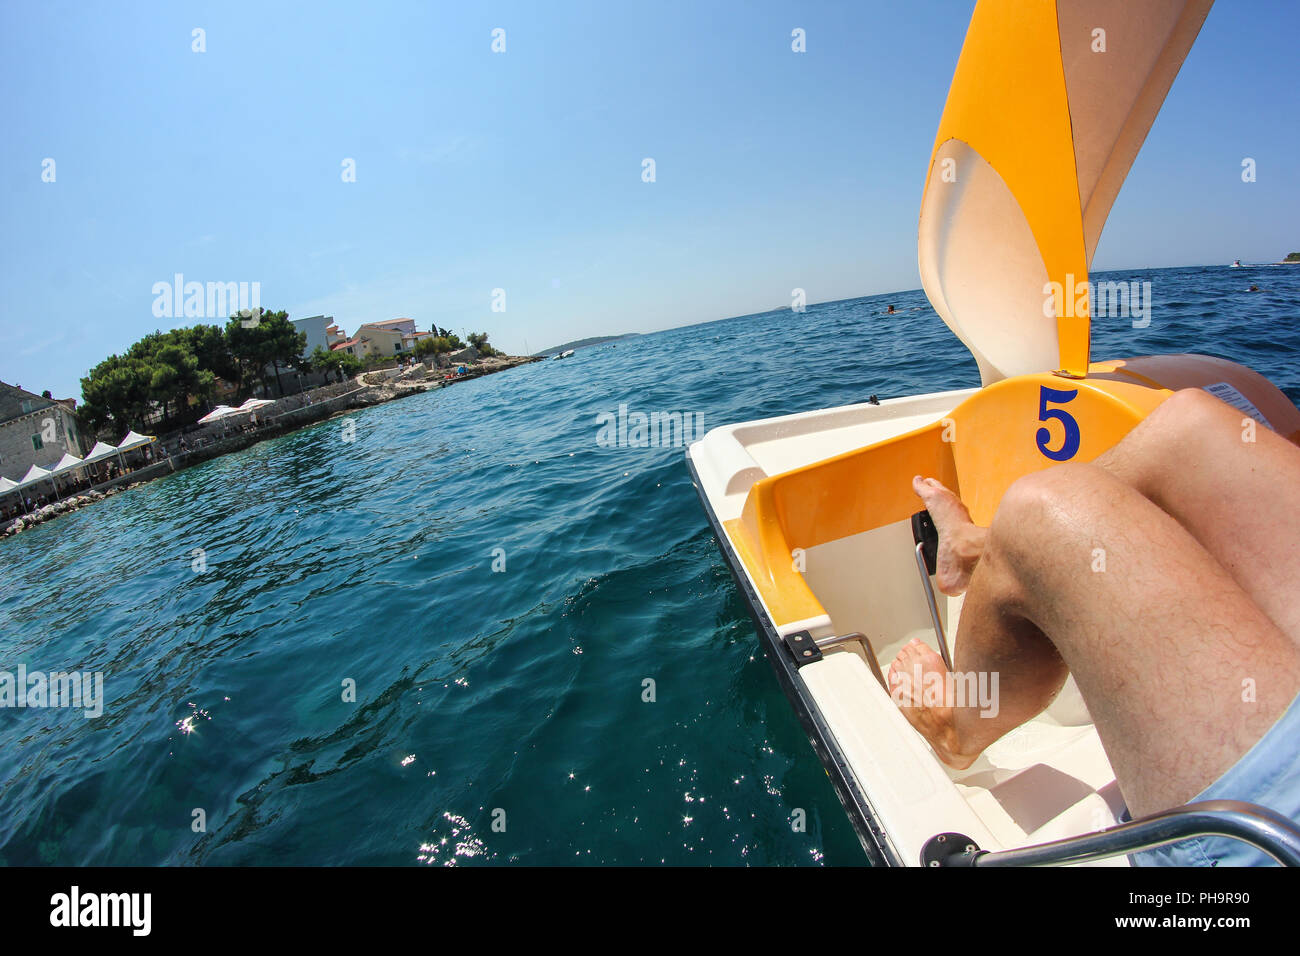 A picture from a rented paddle boat floating on the sea near the Croatian shore. Sunny day and great relaxation during the holiday. Stock Photo